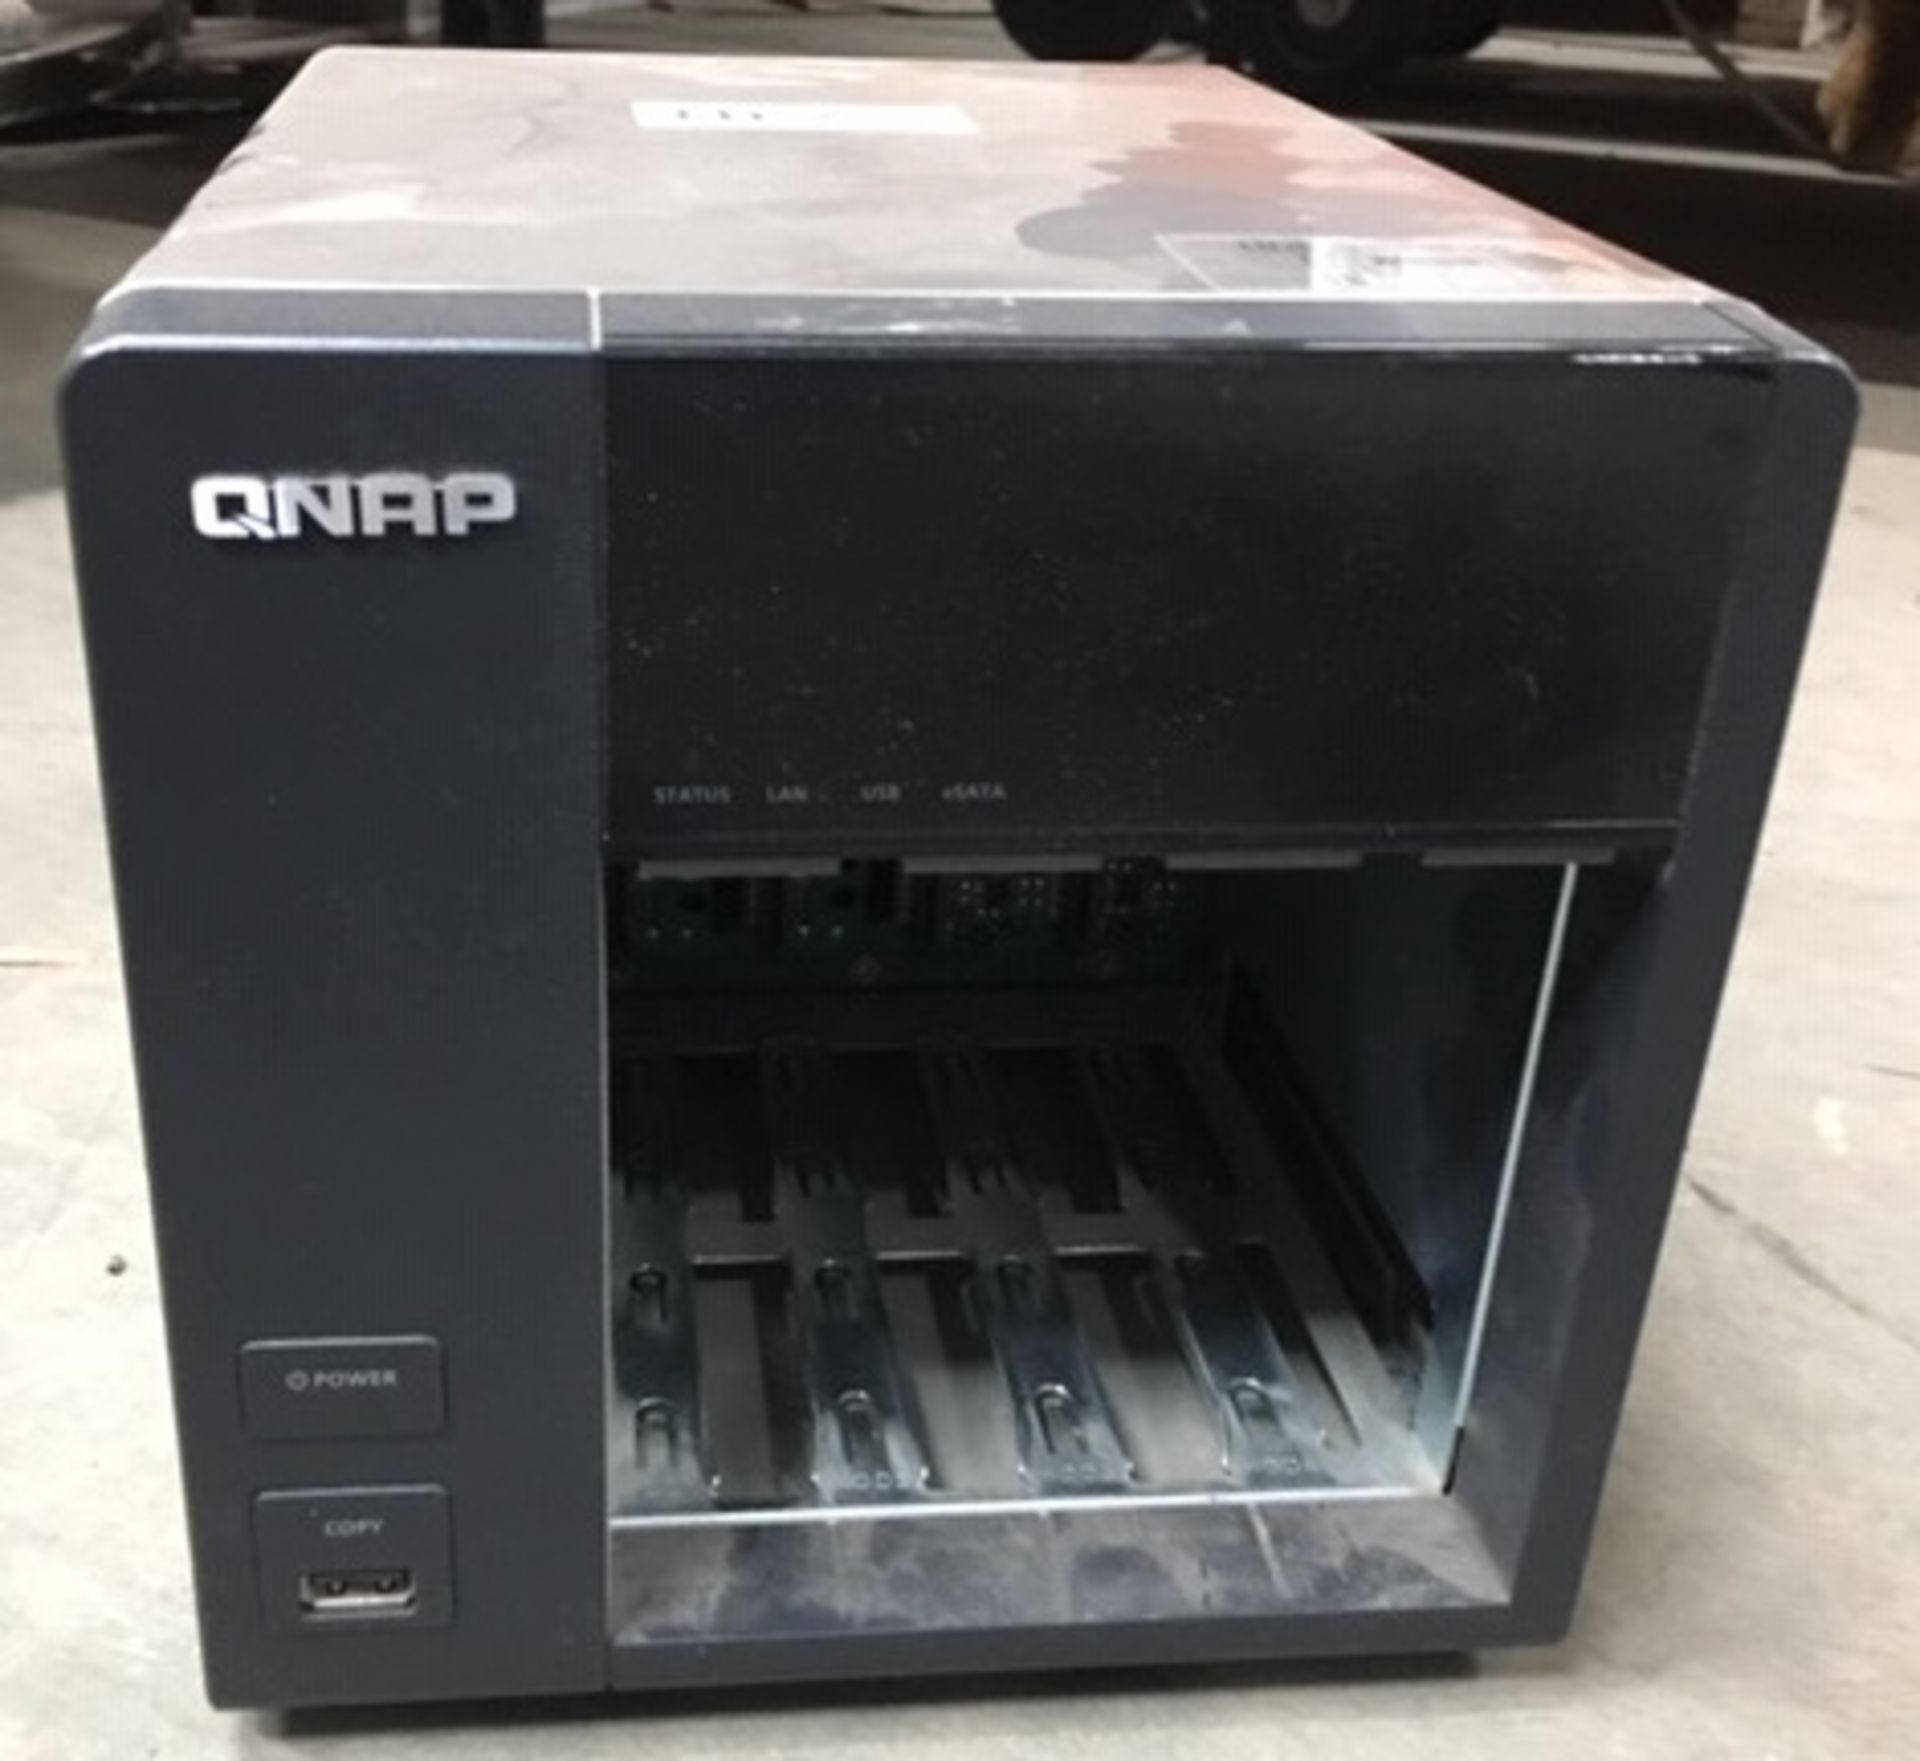 QNAP TS-412 Digital Home Series All-in-One Turbo NAS Server (Incomplete) - Image 2 of 4